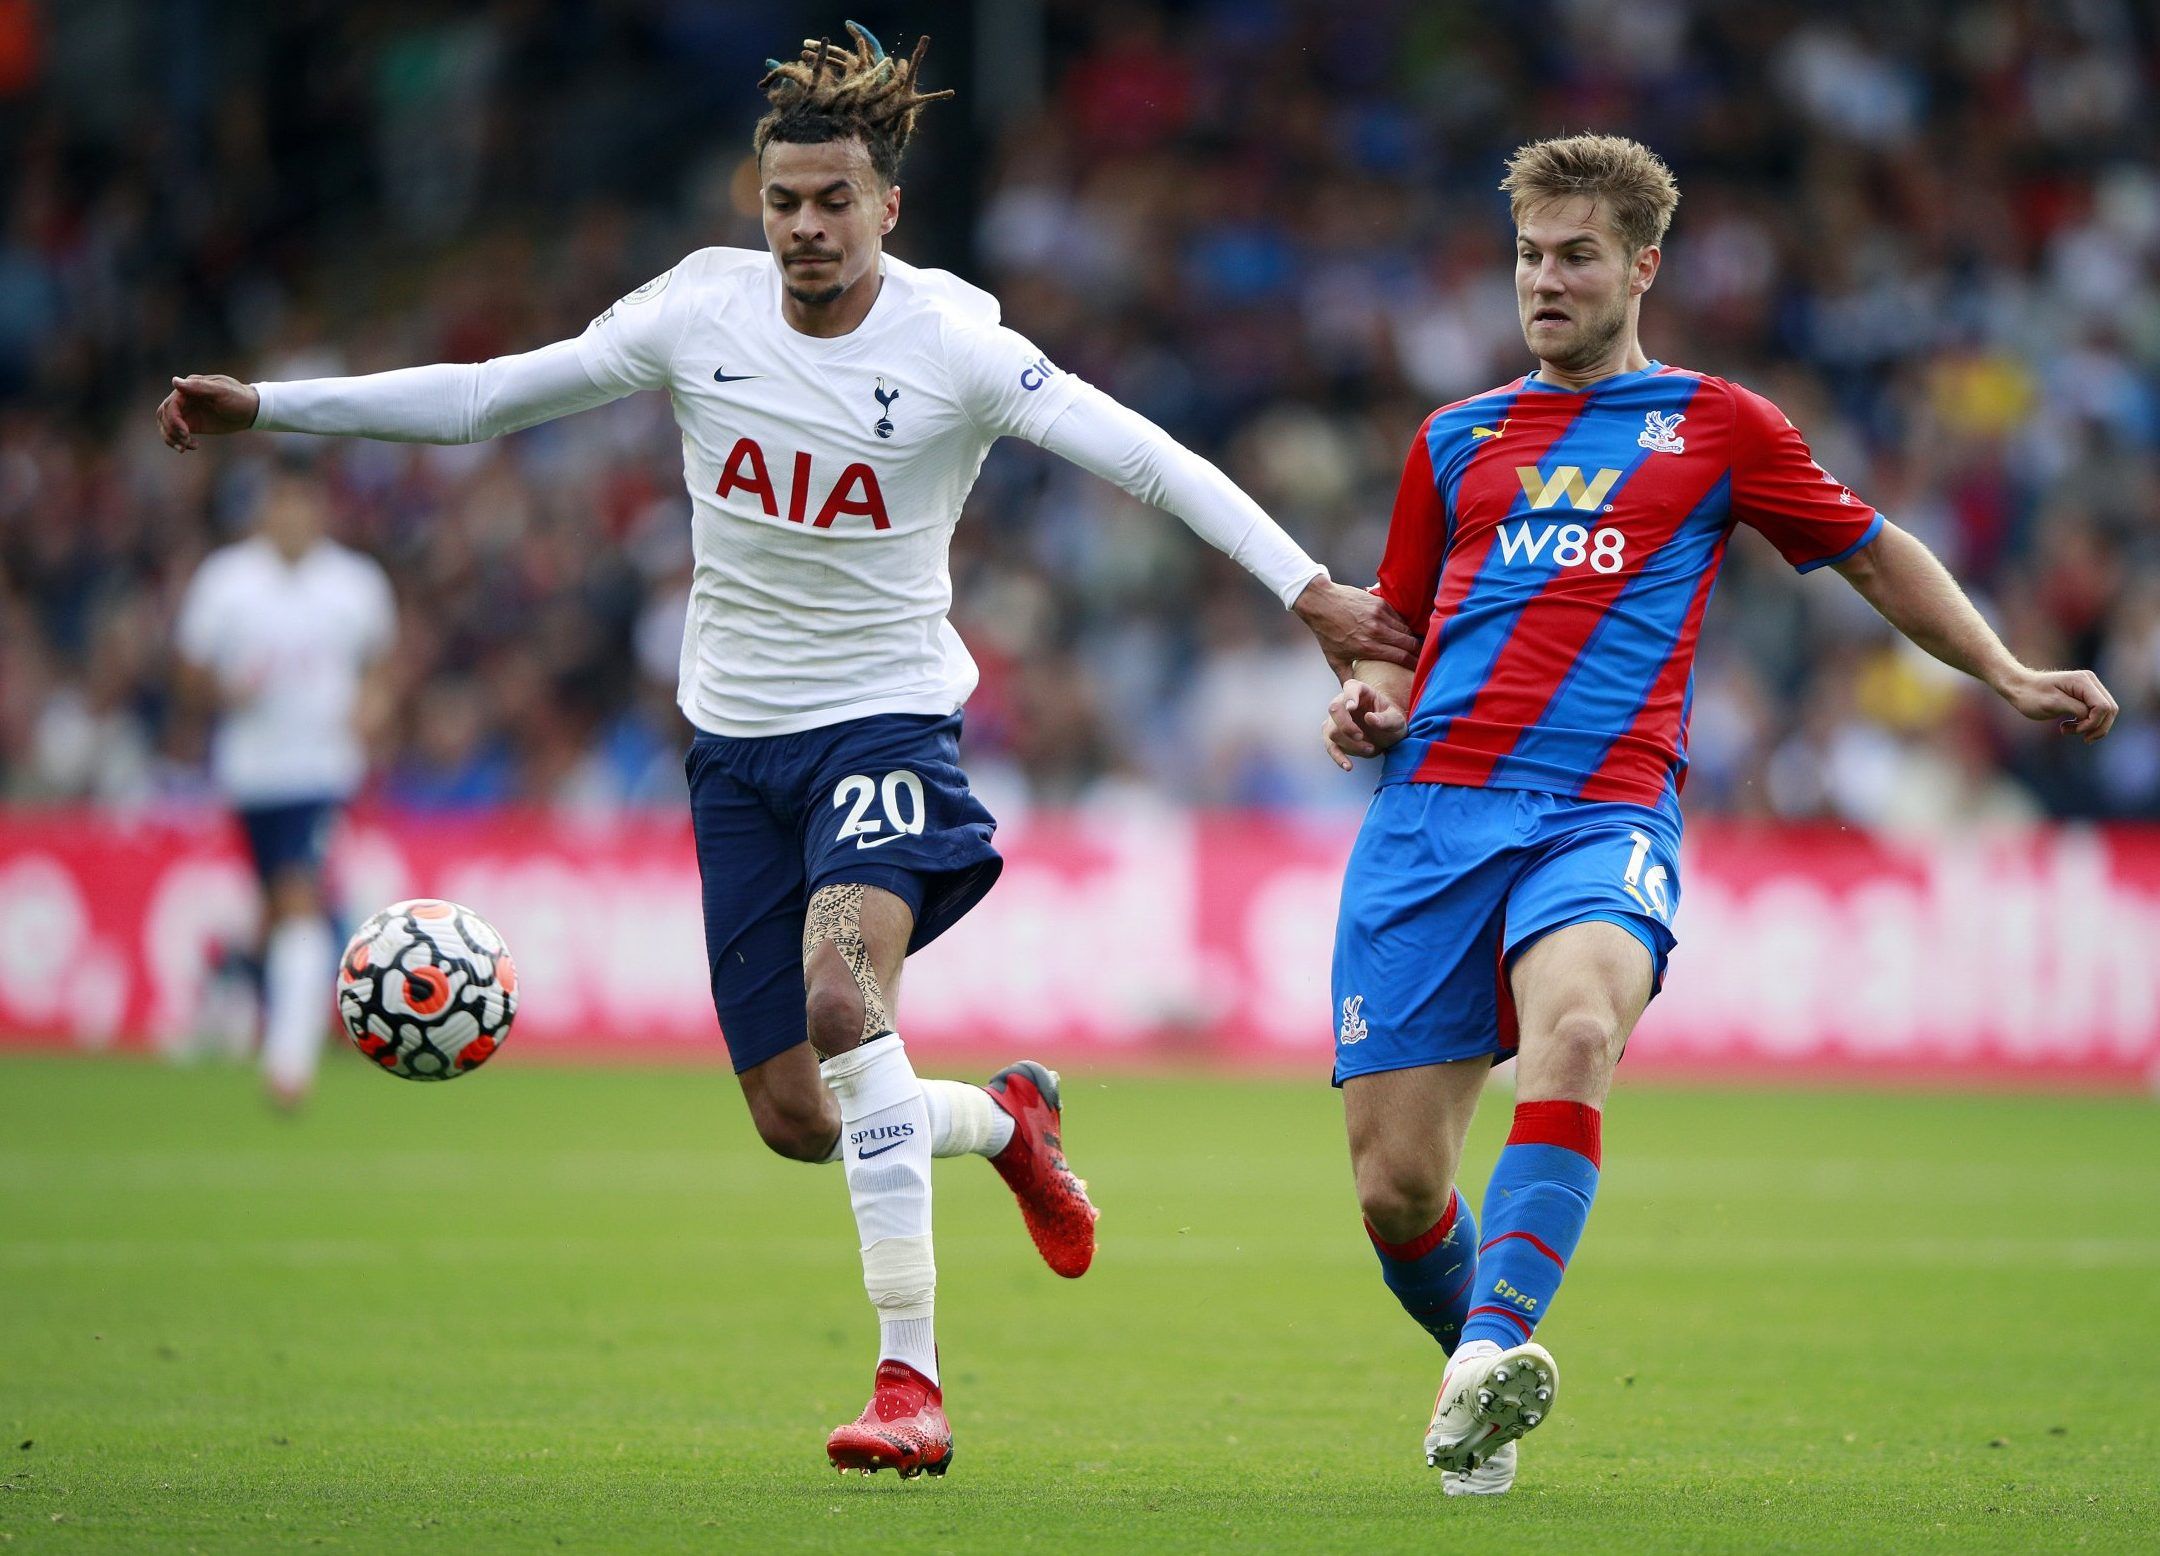 Spurs midfielder Dele Alli in action against Crystal Palace in the Premier League